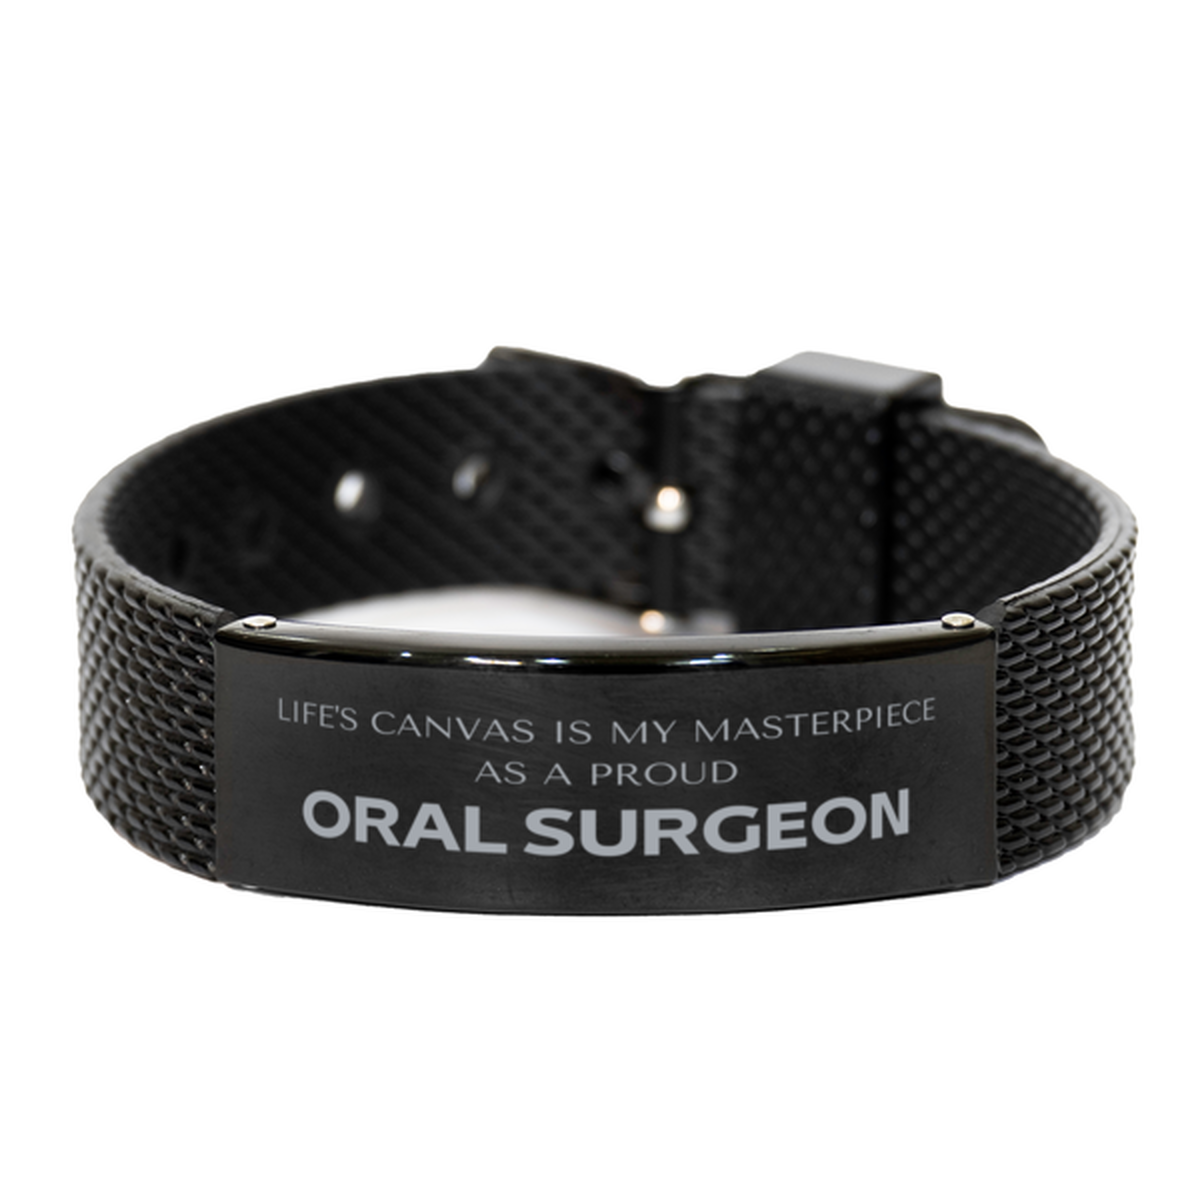 Proud Oral Surgeon Gifts, Life's canvas is my masterpiece, Epic Birthday Christmas Unique Black Shark Mesh Bracelet For Oral Surgeon, Coworkers, Men, Women, Friends